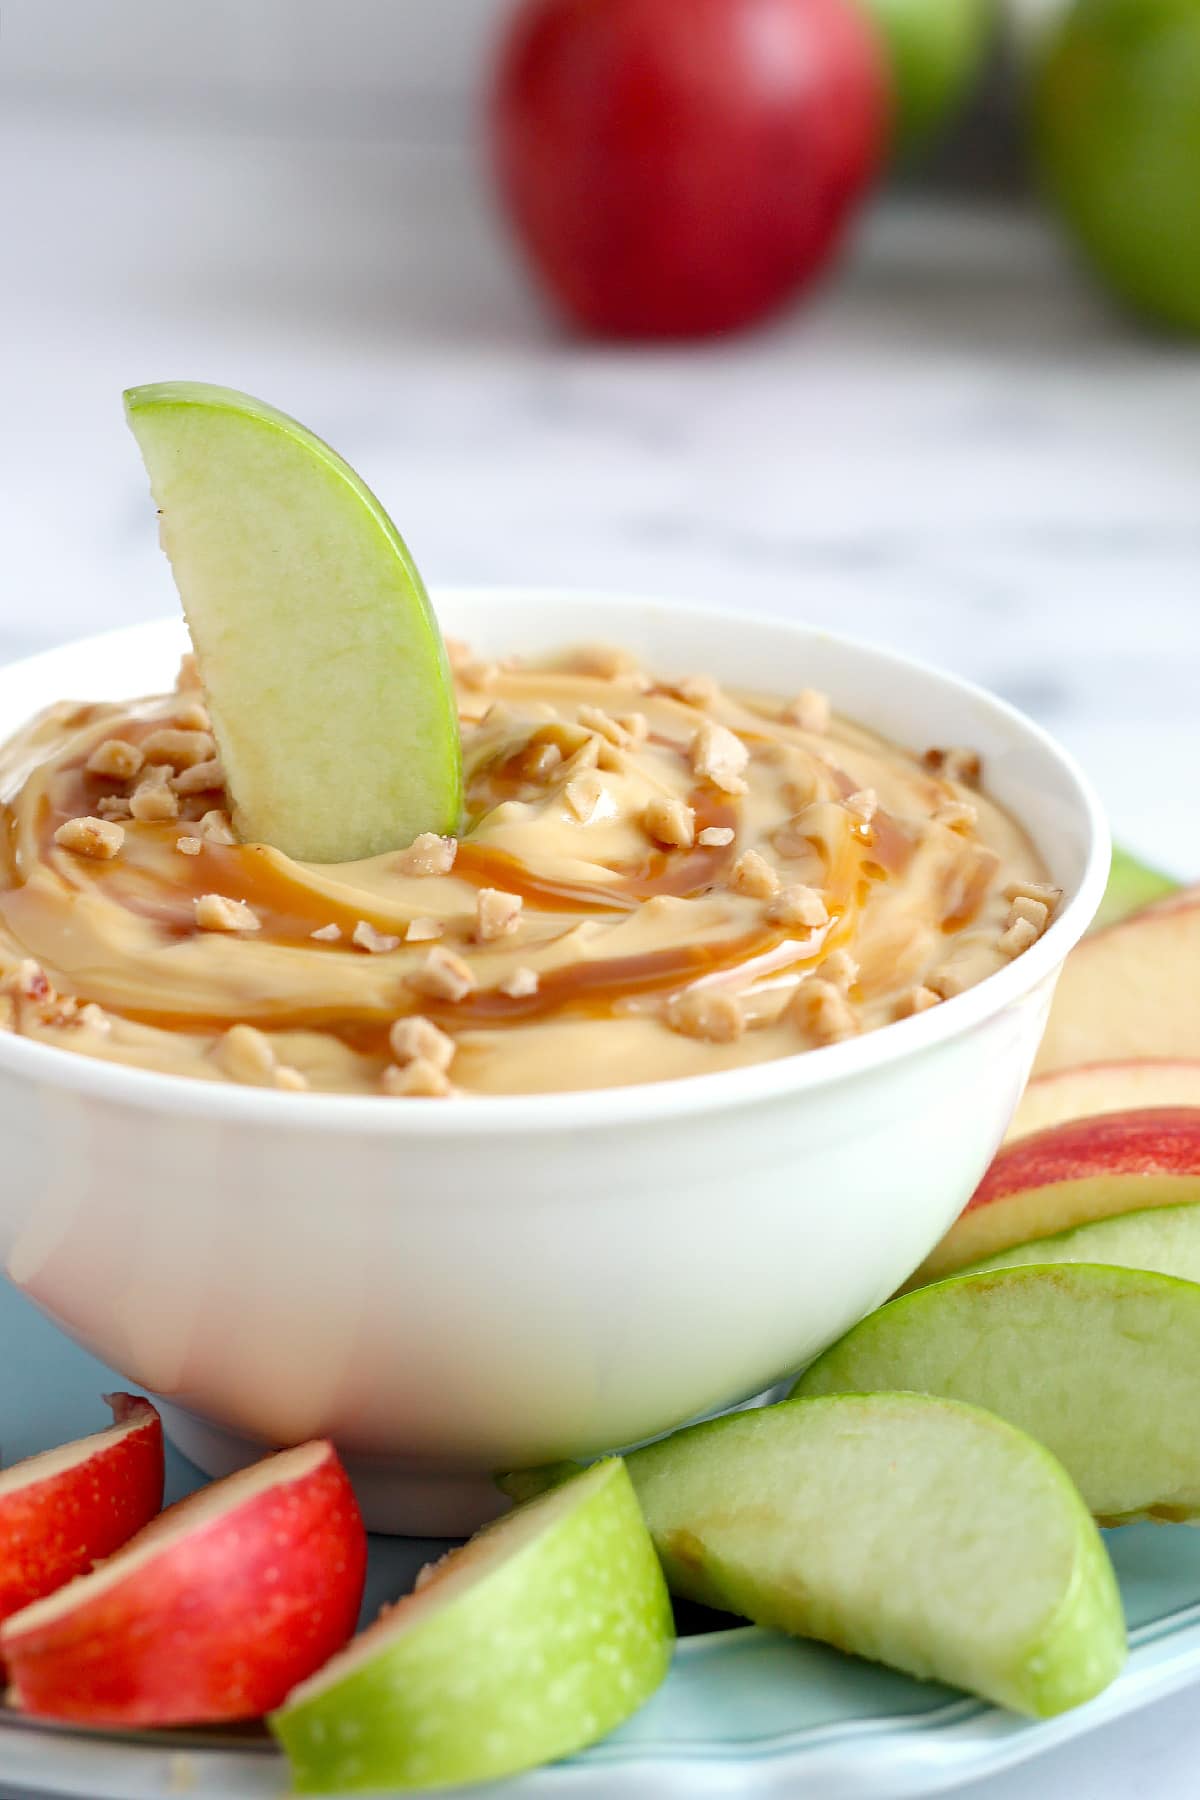 Creamy caramel apple dip in a white ceramic bowl drizzled with caramel and topped with heath bits.